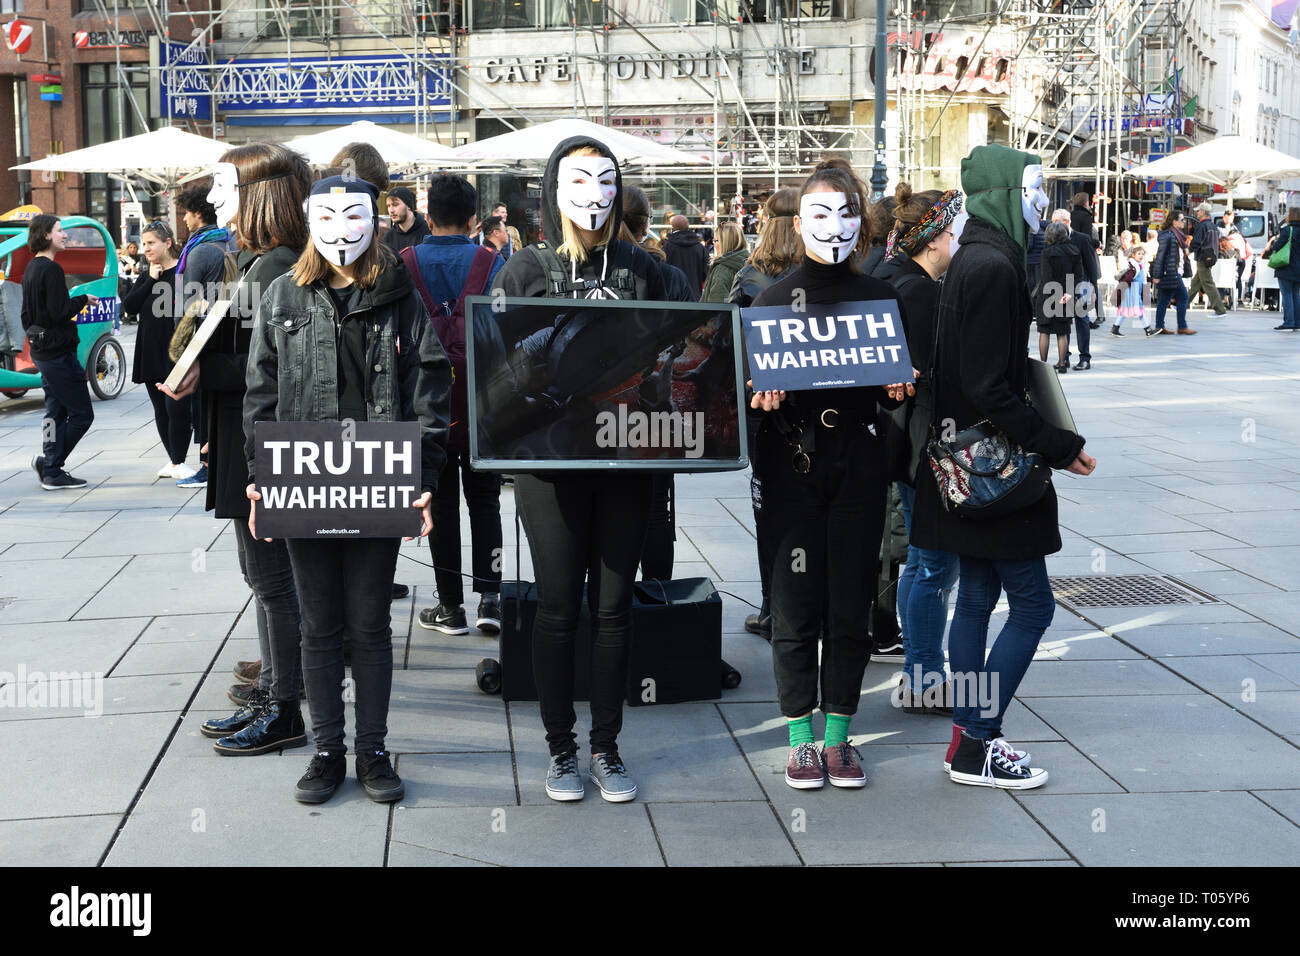 Vienna, Austria. March 17, 2019. Campaign for Animal Rights at the Stock in Eisen Platz in Vienna. Credit: Franz Perc / Alamy Live News Stock Photo